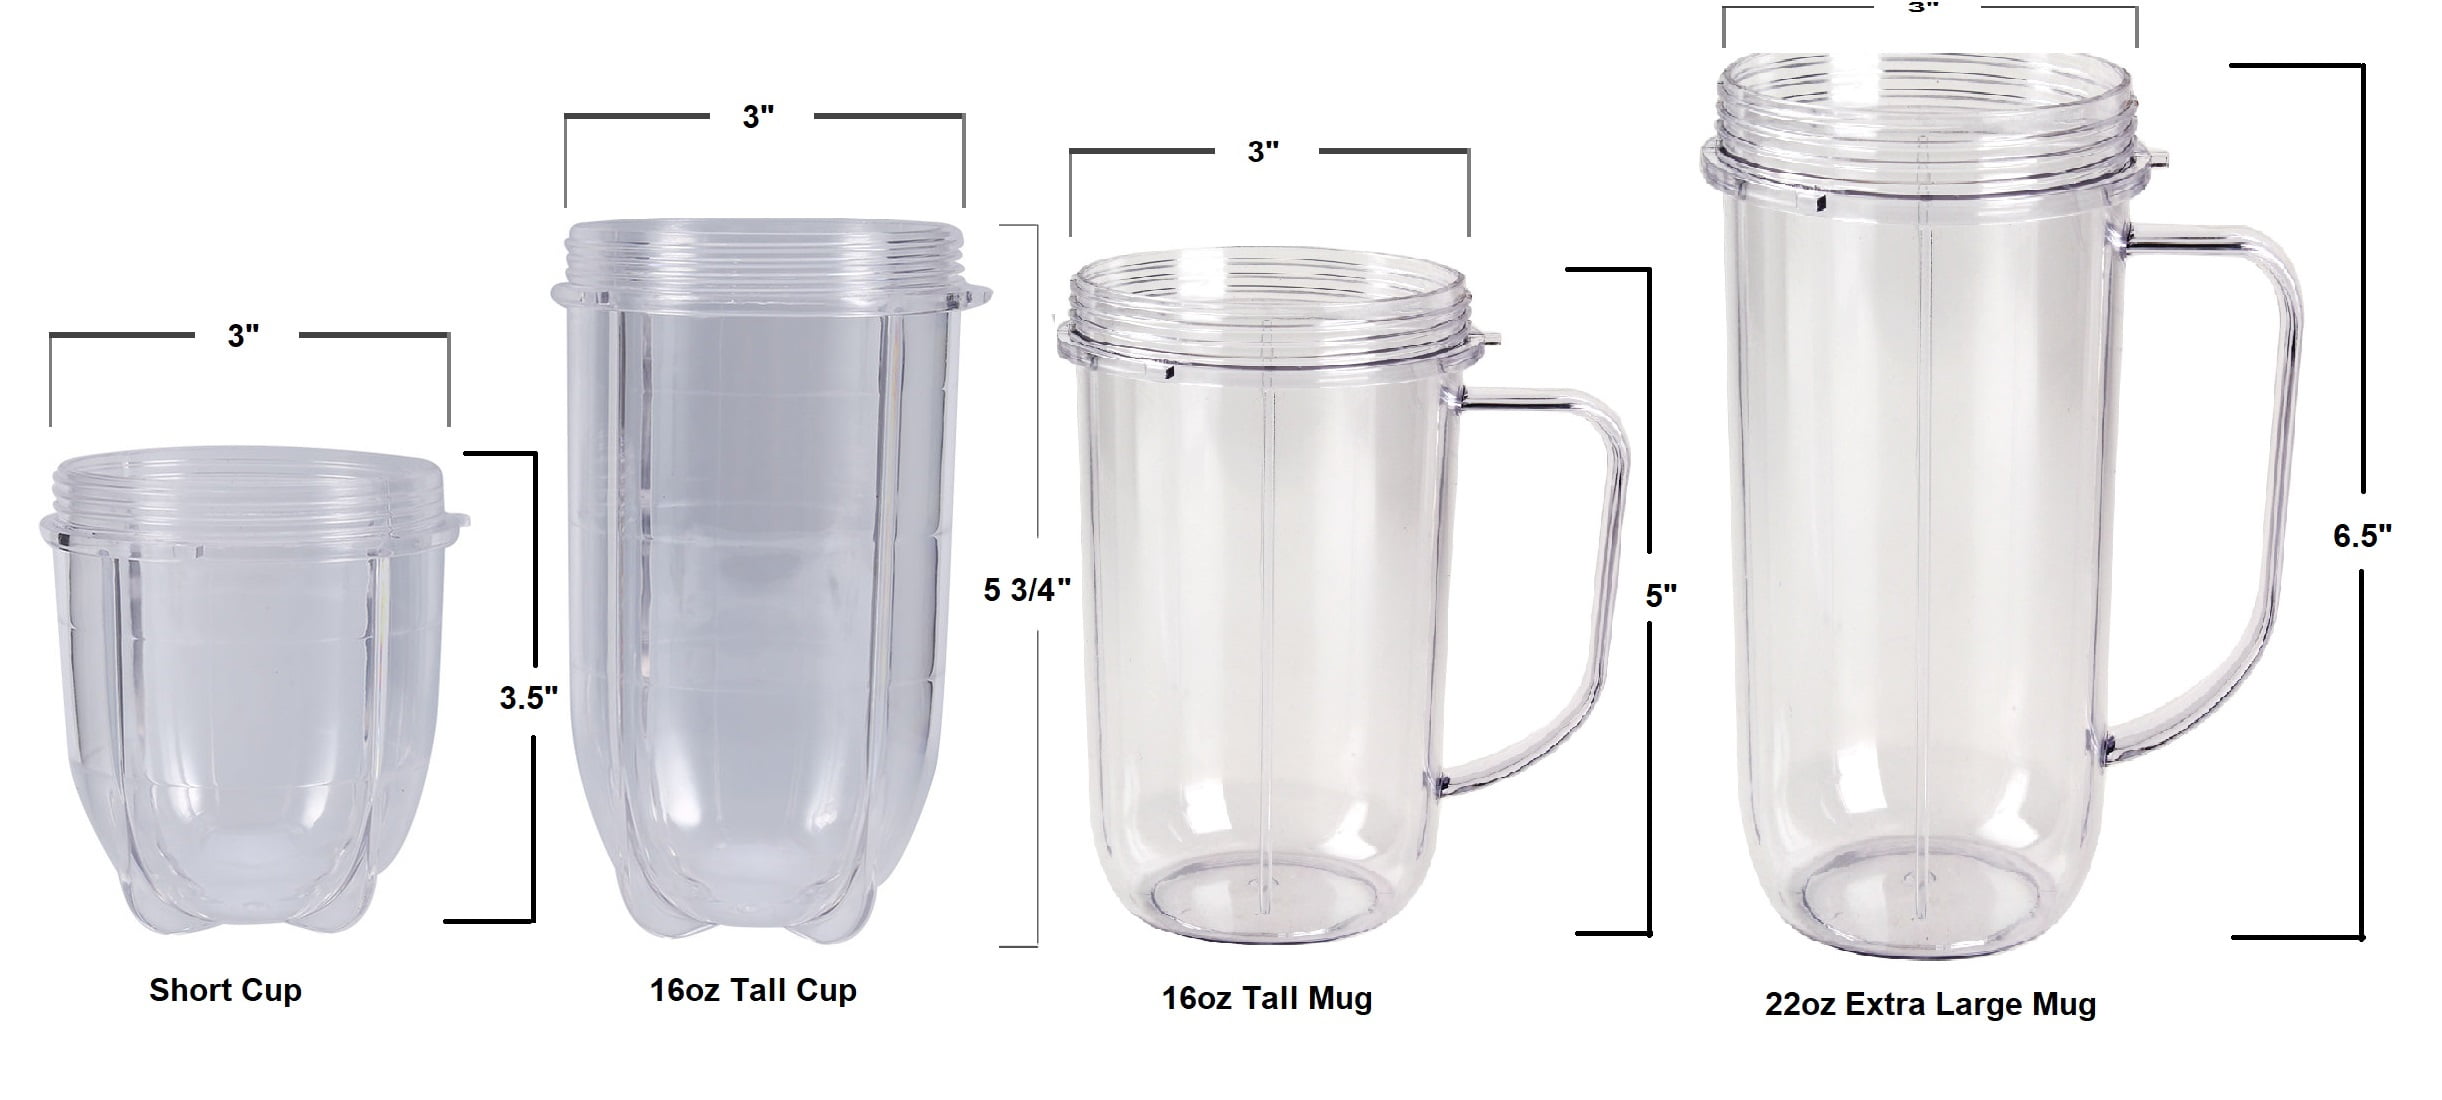  Blendin Replacement Blender Mugs Cup with Colored Comfort Lip  Rings, Compatible with Original Magic Bullet Blender 250W MB-1001,  MB-1001B, MBR-1101, MBR-1701, MBR-1702, MBR-0301, 16 Ounce, 4-Pack : Home &  Kitchen